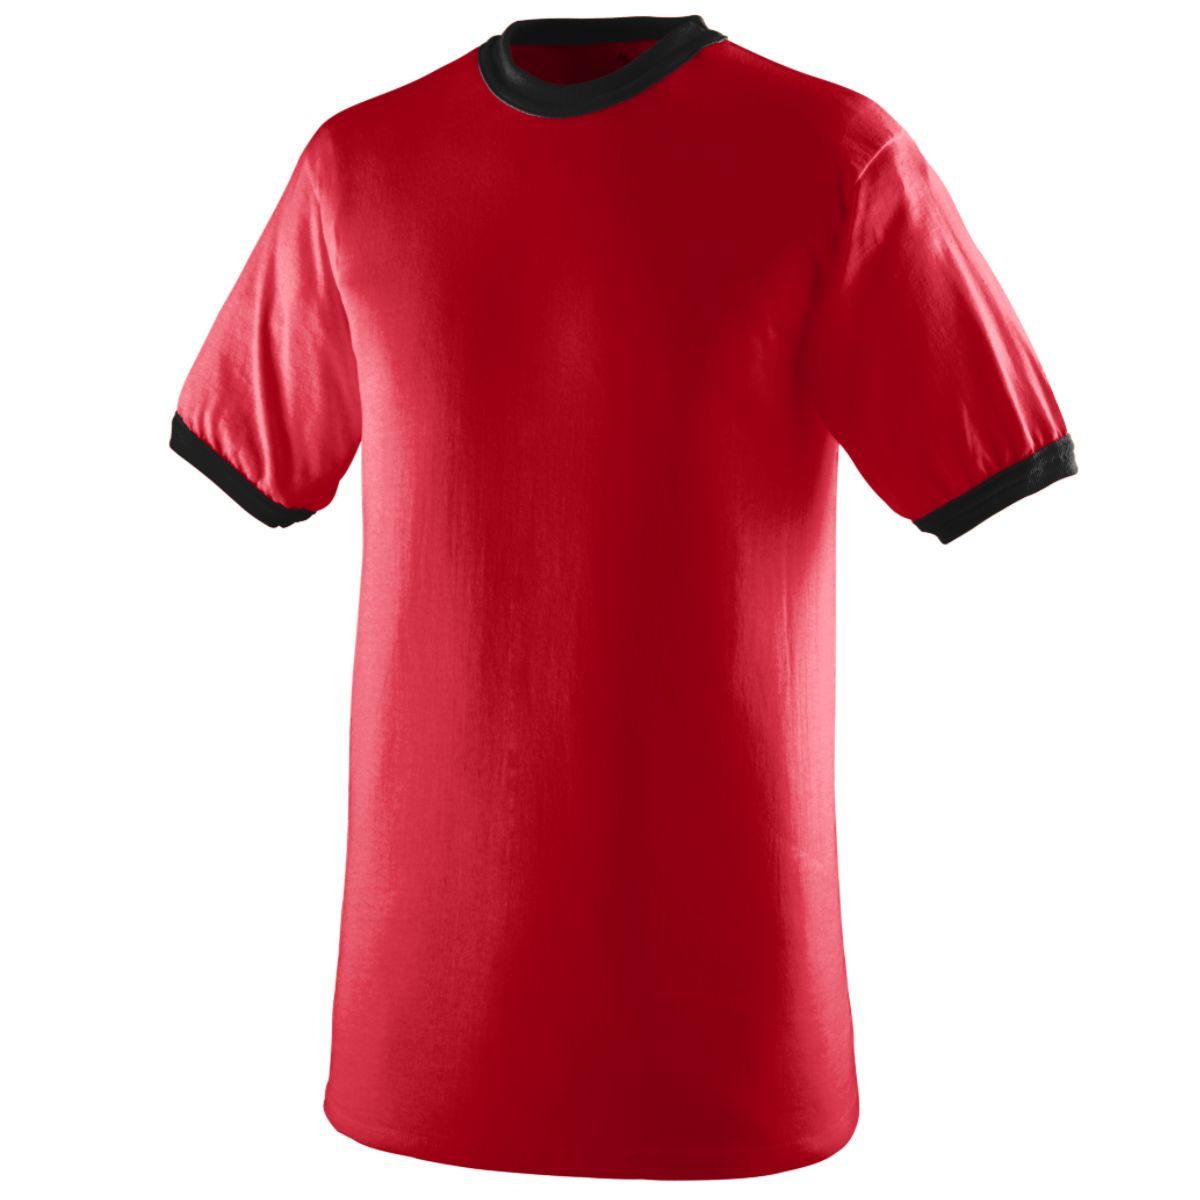 Augusta Sportswear Youth-Ringer T-Shirt in Red/Black  -Part of the Youth, Youth-Tee-Shirt, T-Shirts, Augusta-Products, Soccer, Shirts, All-Sports-1 product lines at KanaleyCreations.com